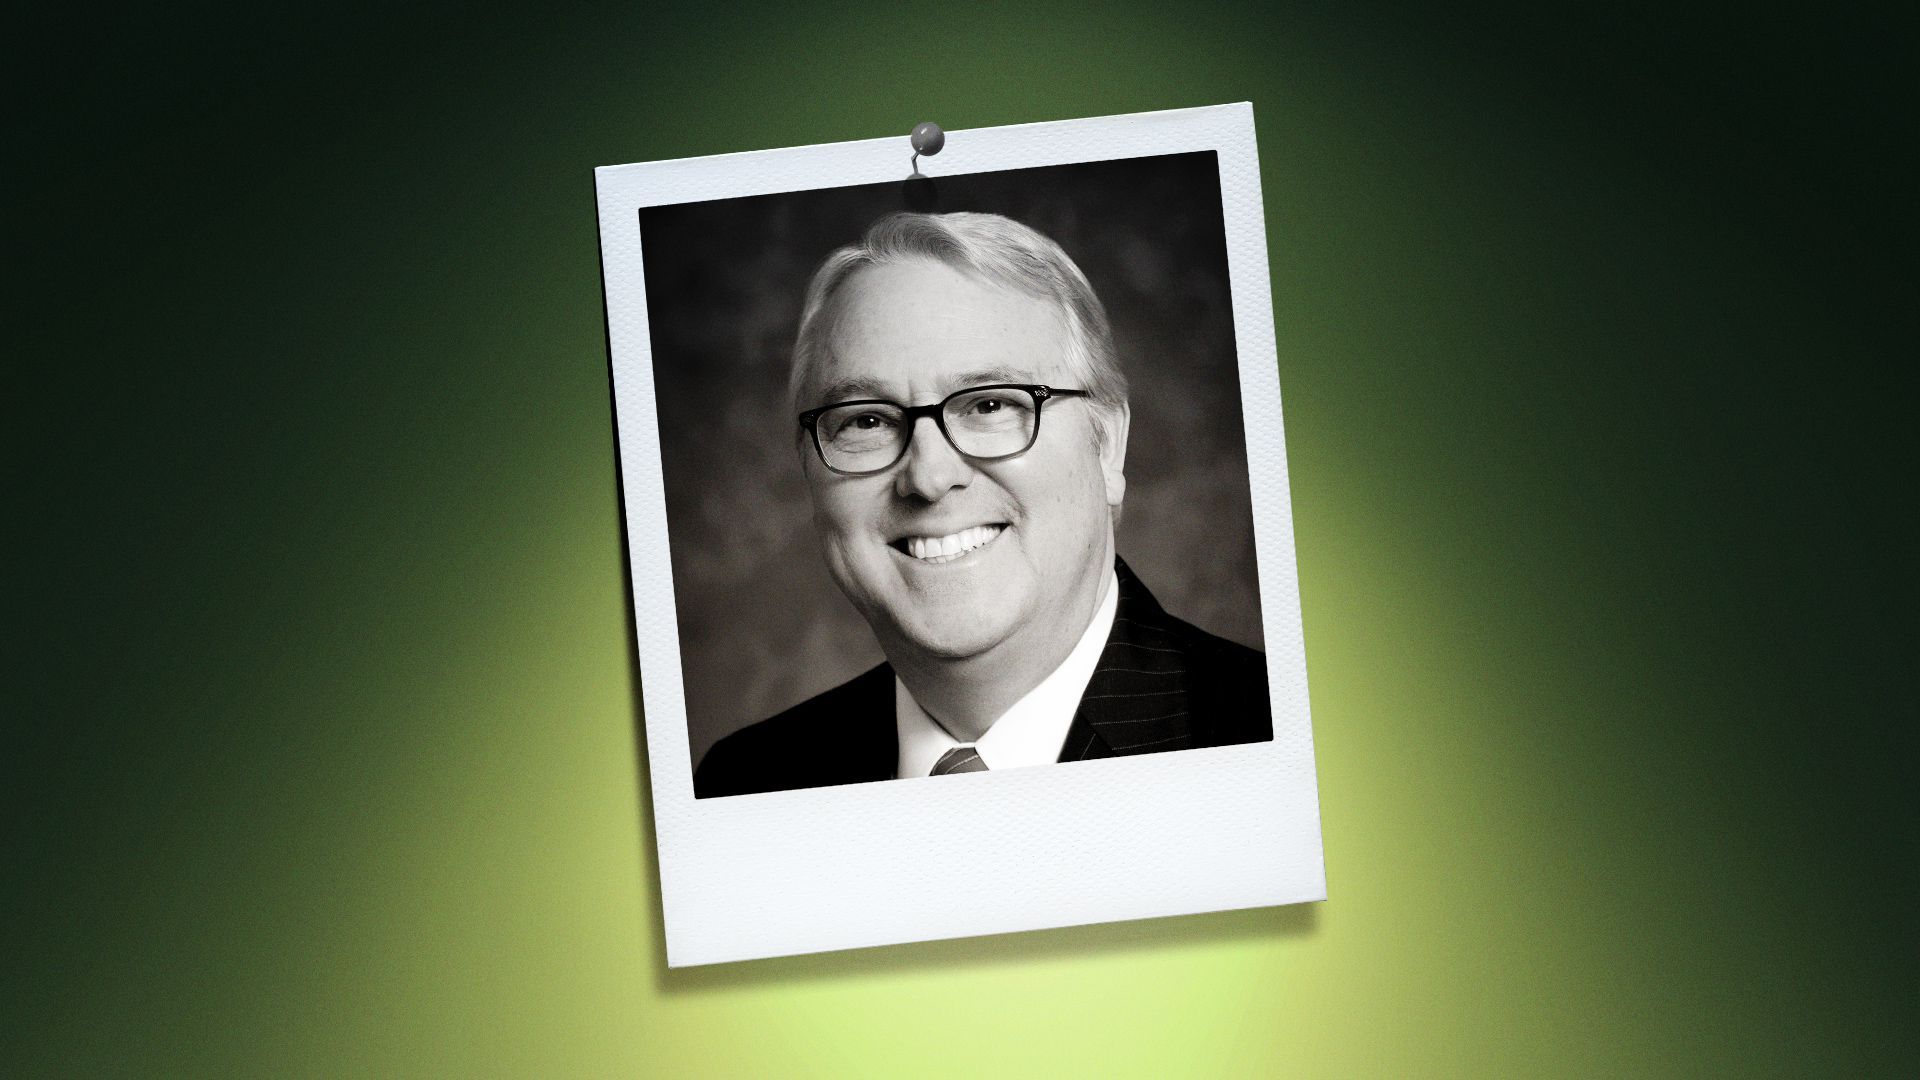 Photo illustration of Randy Woodson in the center of a Polaroid photo under a green spotlight.